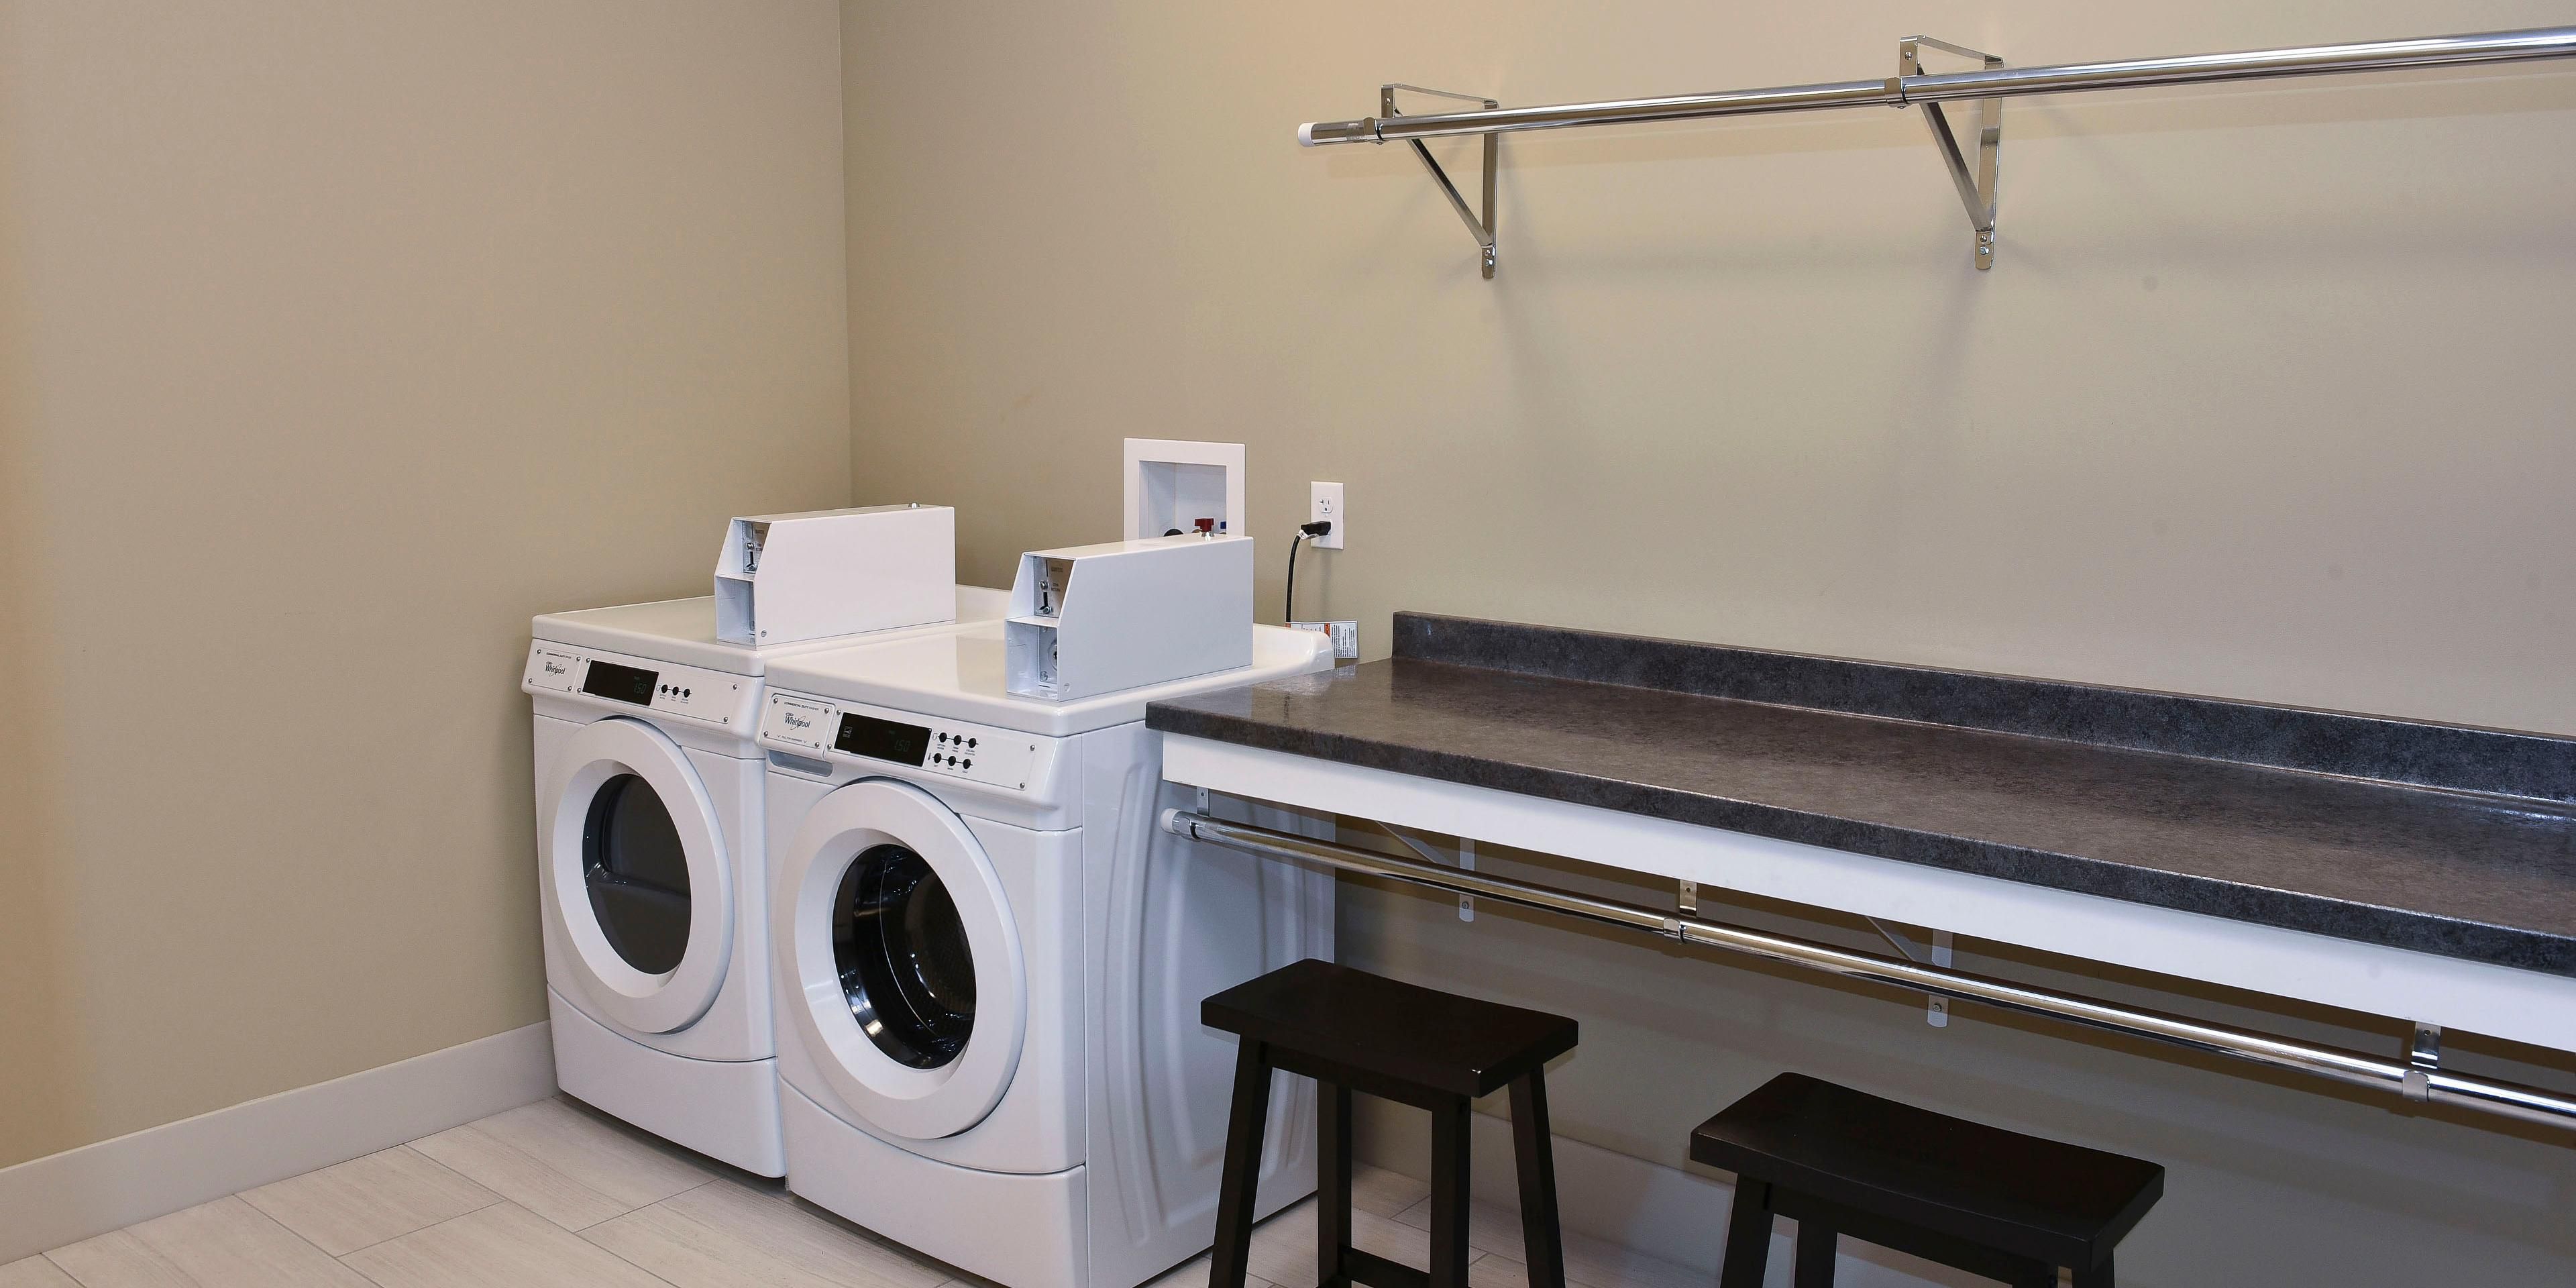 Our In-house laundry room makes it easier for those longer stays.
 Laundry soaps and fabric softeners available. 